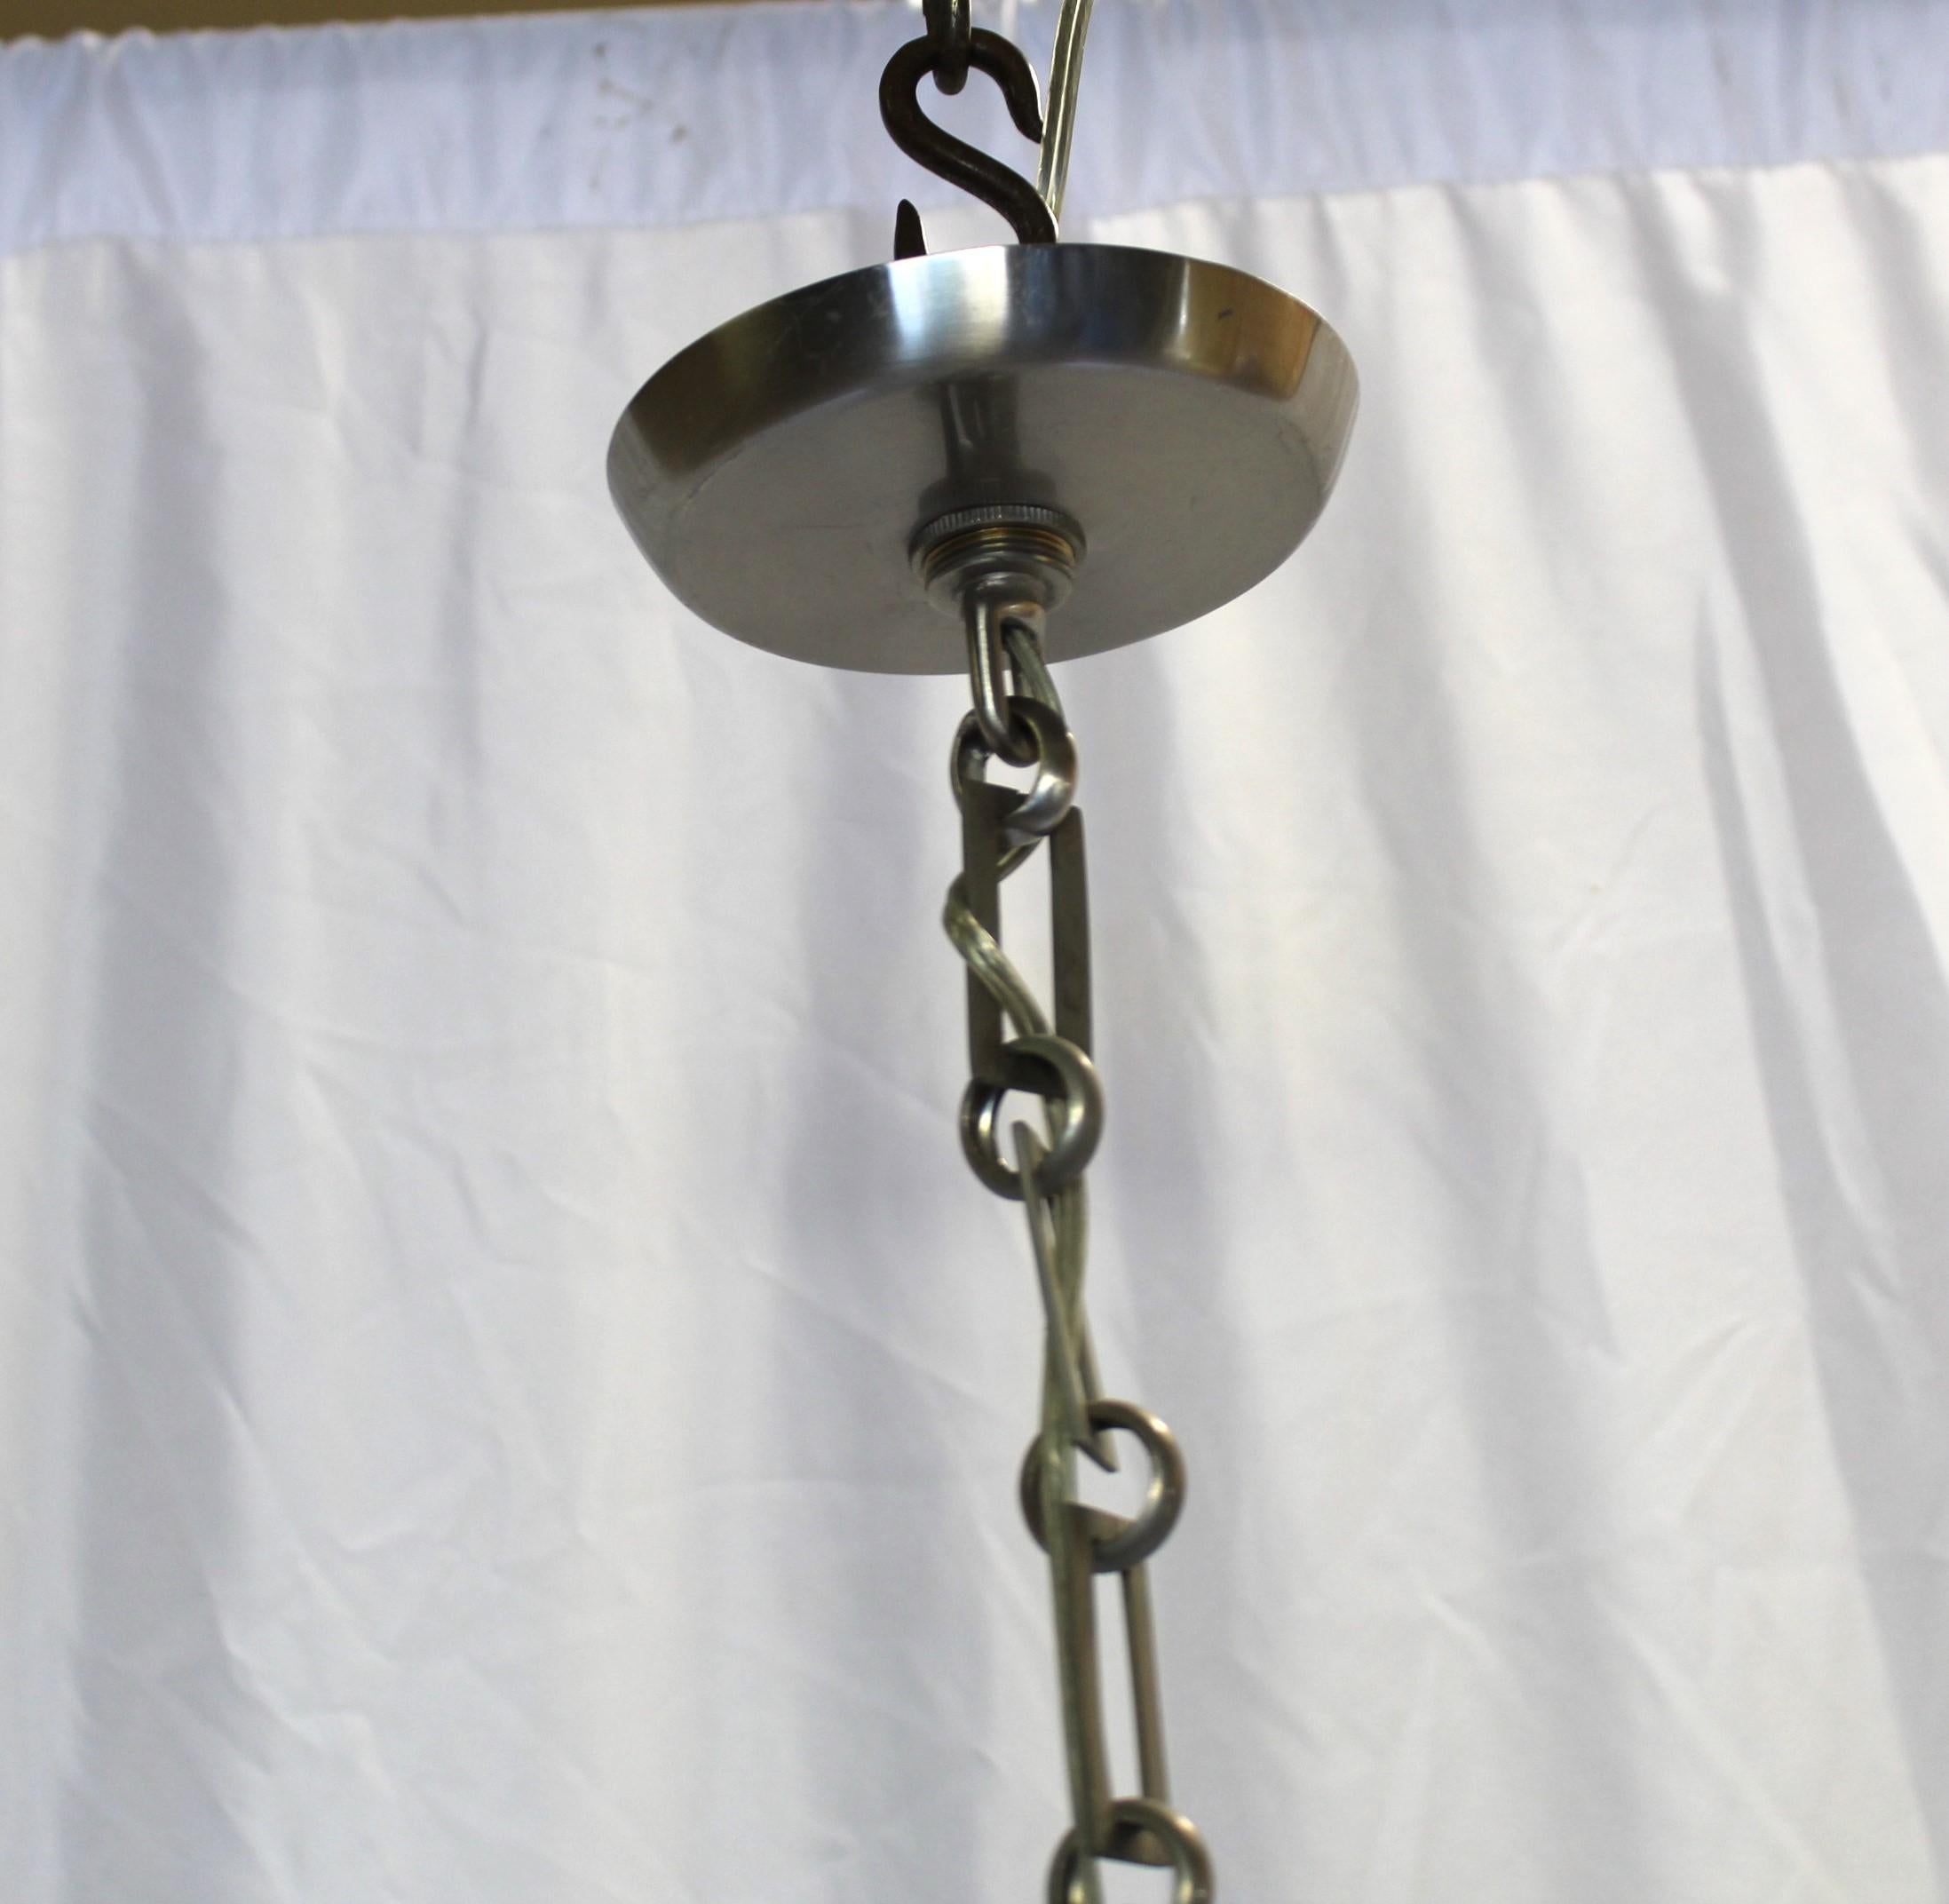 A custom designed smaller size all metal chandelier that could be used in an entry way or bathroom. This is the showroom sample and never used. Has been in storage. Total drop is at 36